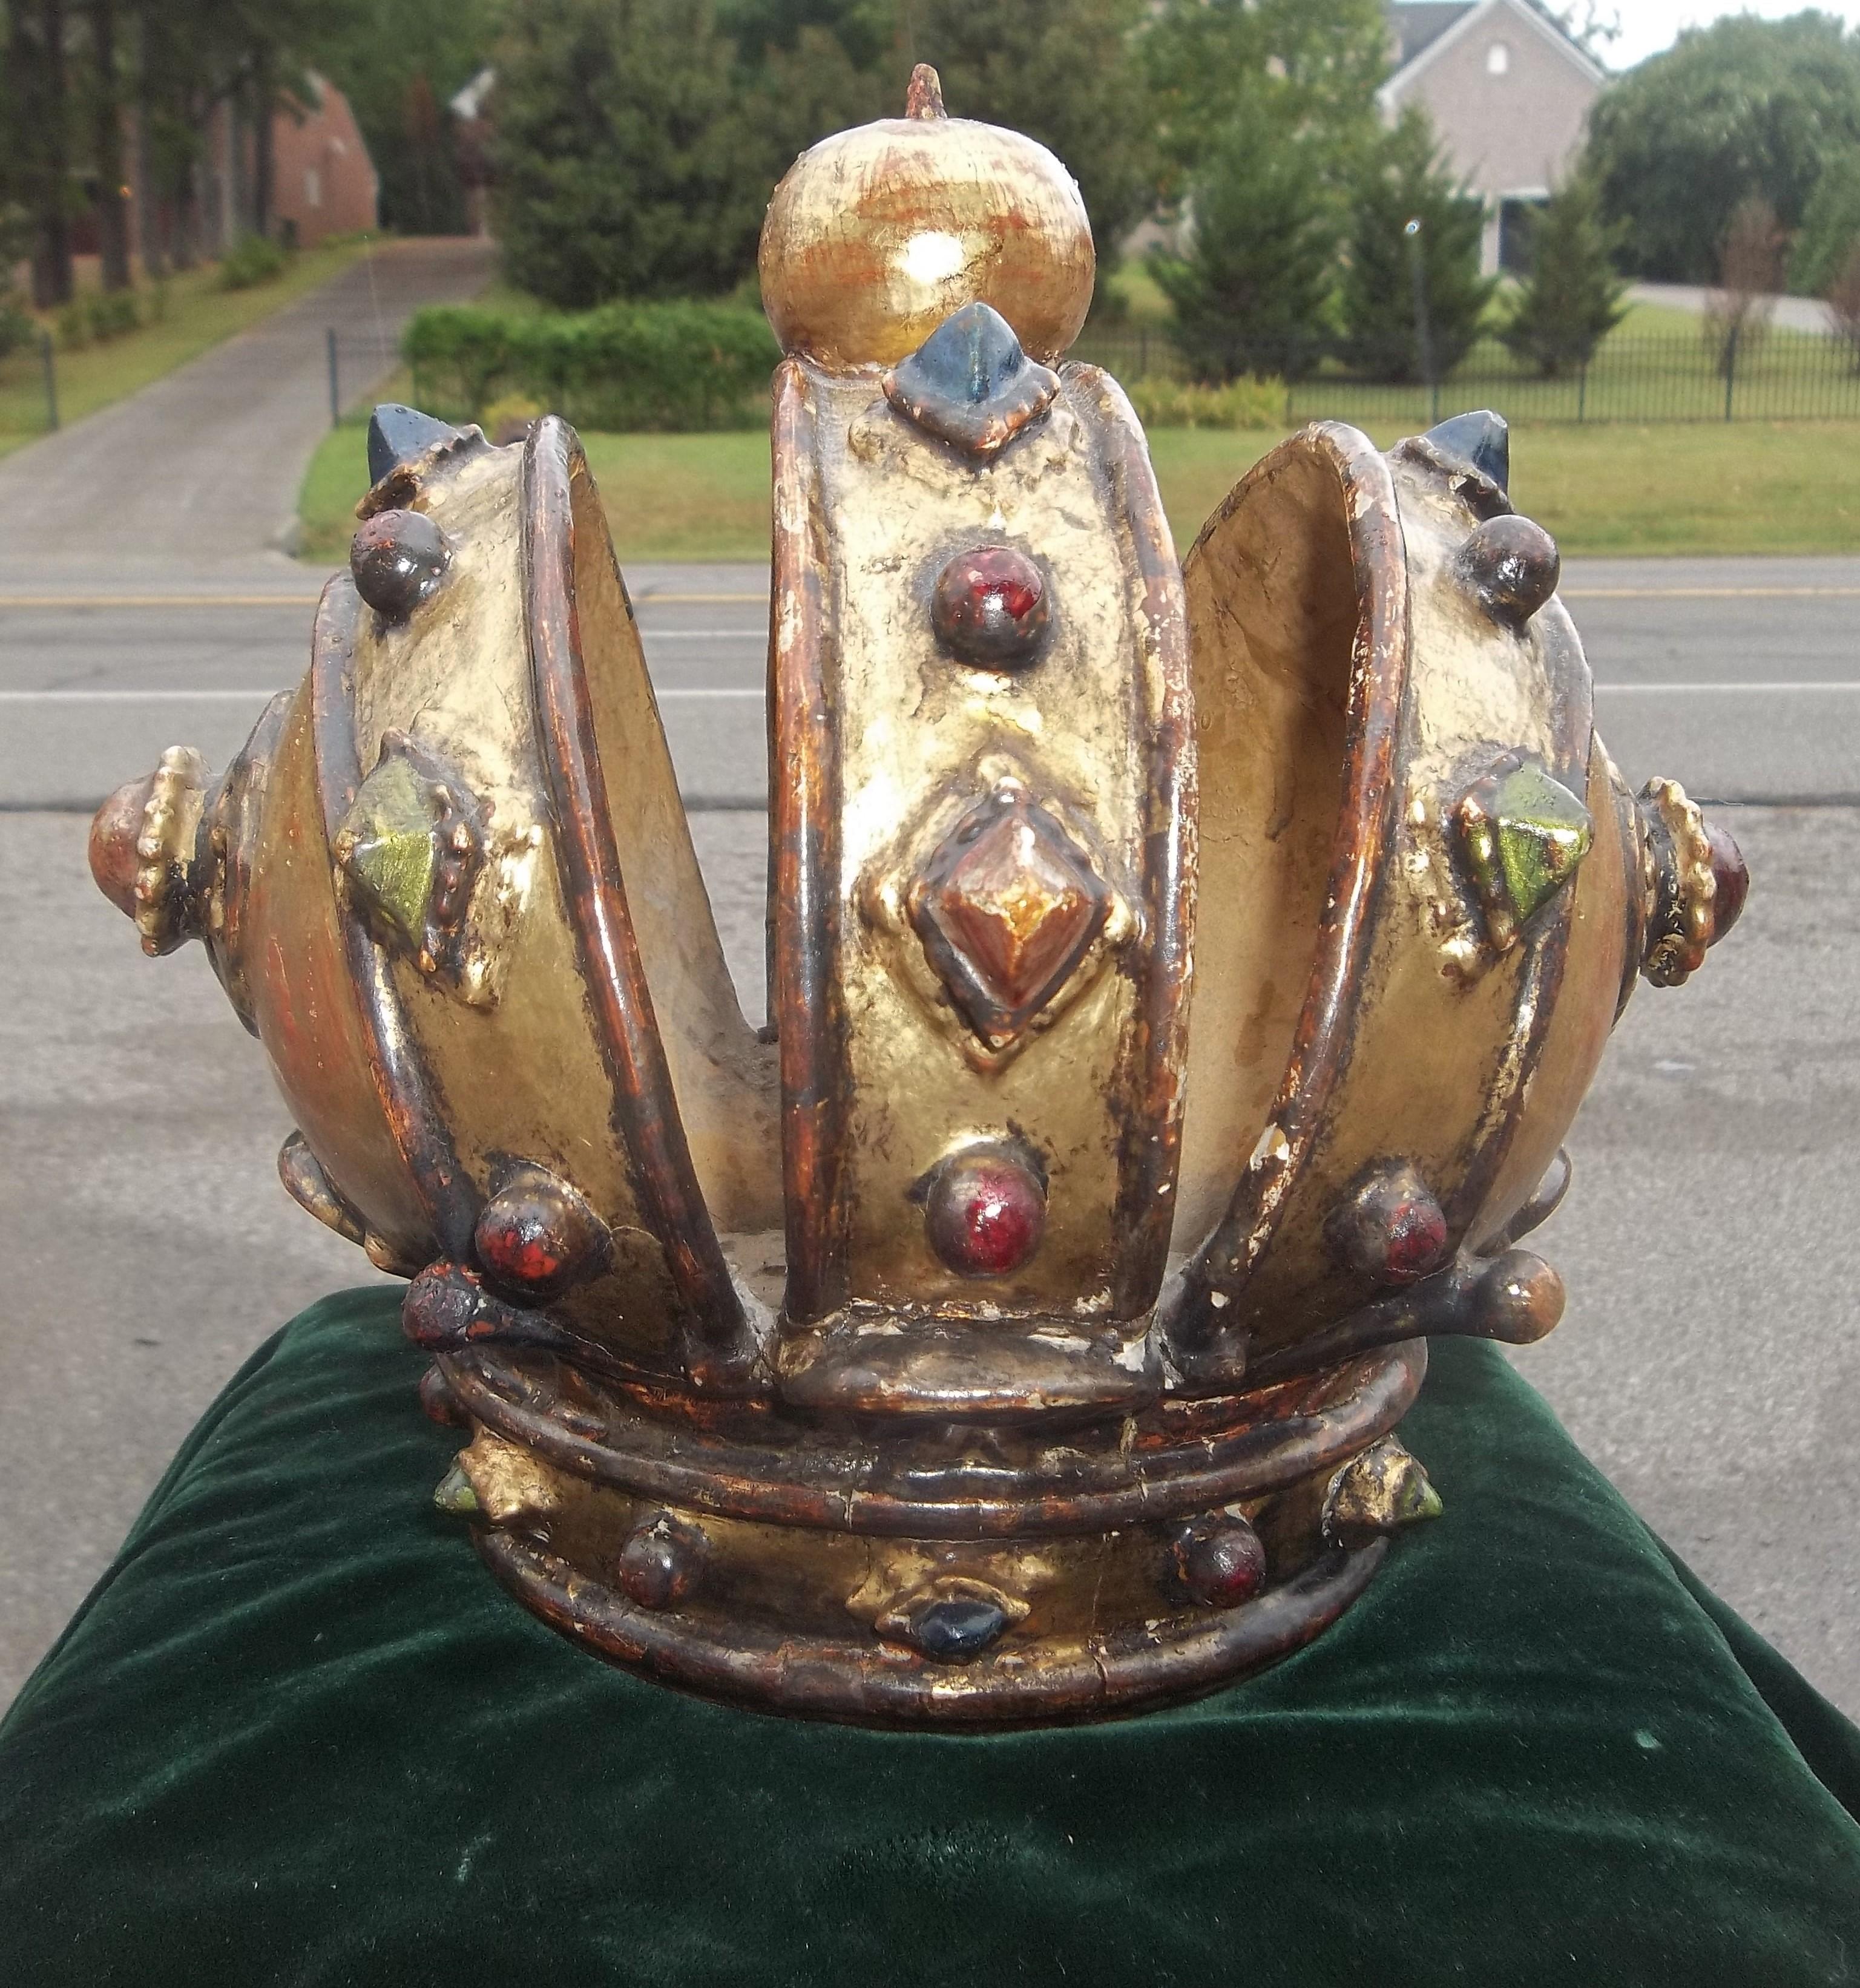 Highly decorative and difficult to find. Probably from a church altar setting, the crown from Mary or a prominent saint. Gilded with carved jewels colored to resemble jewels (emeralds, rubies, sapphires). 

Usual wear and losses to the gilding